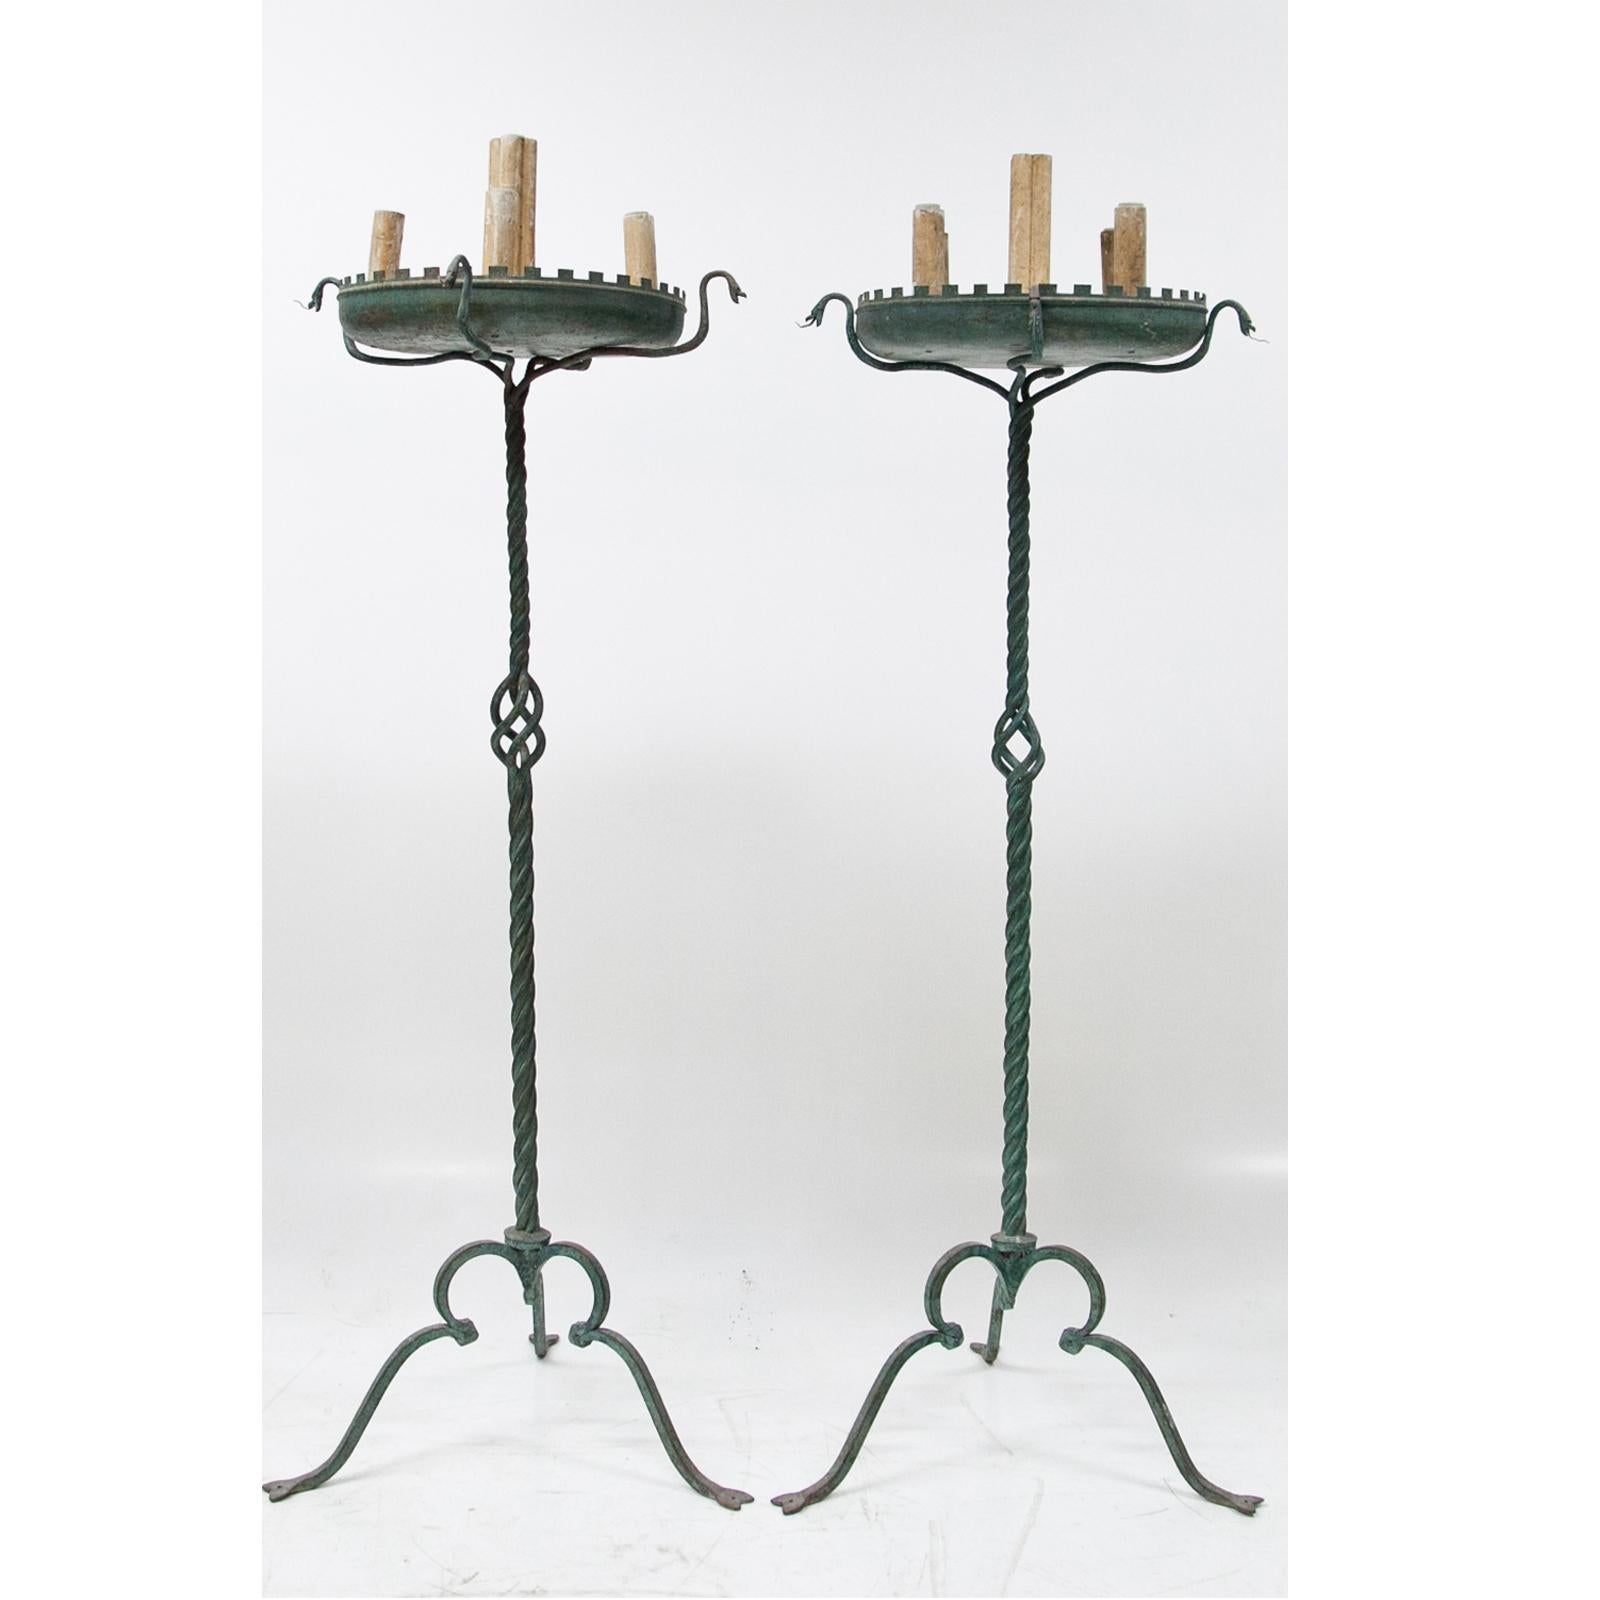 Two large bronze lamps with a twisted shaft and broad dish, resting on stylized snakes. With five sockets in total. The tongues of the snakes are partly missing.